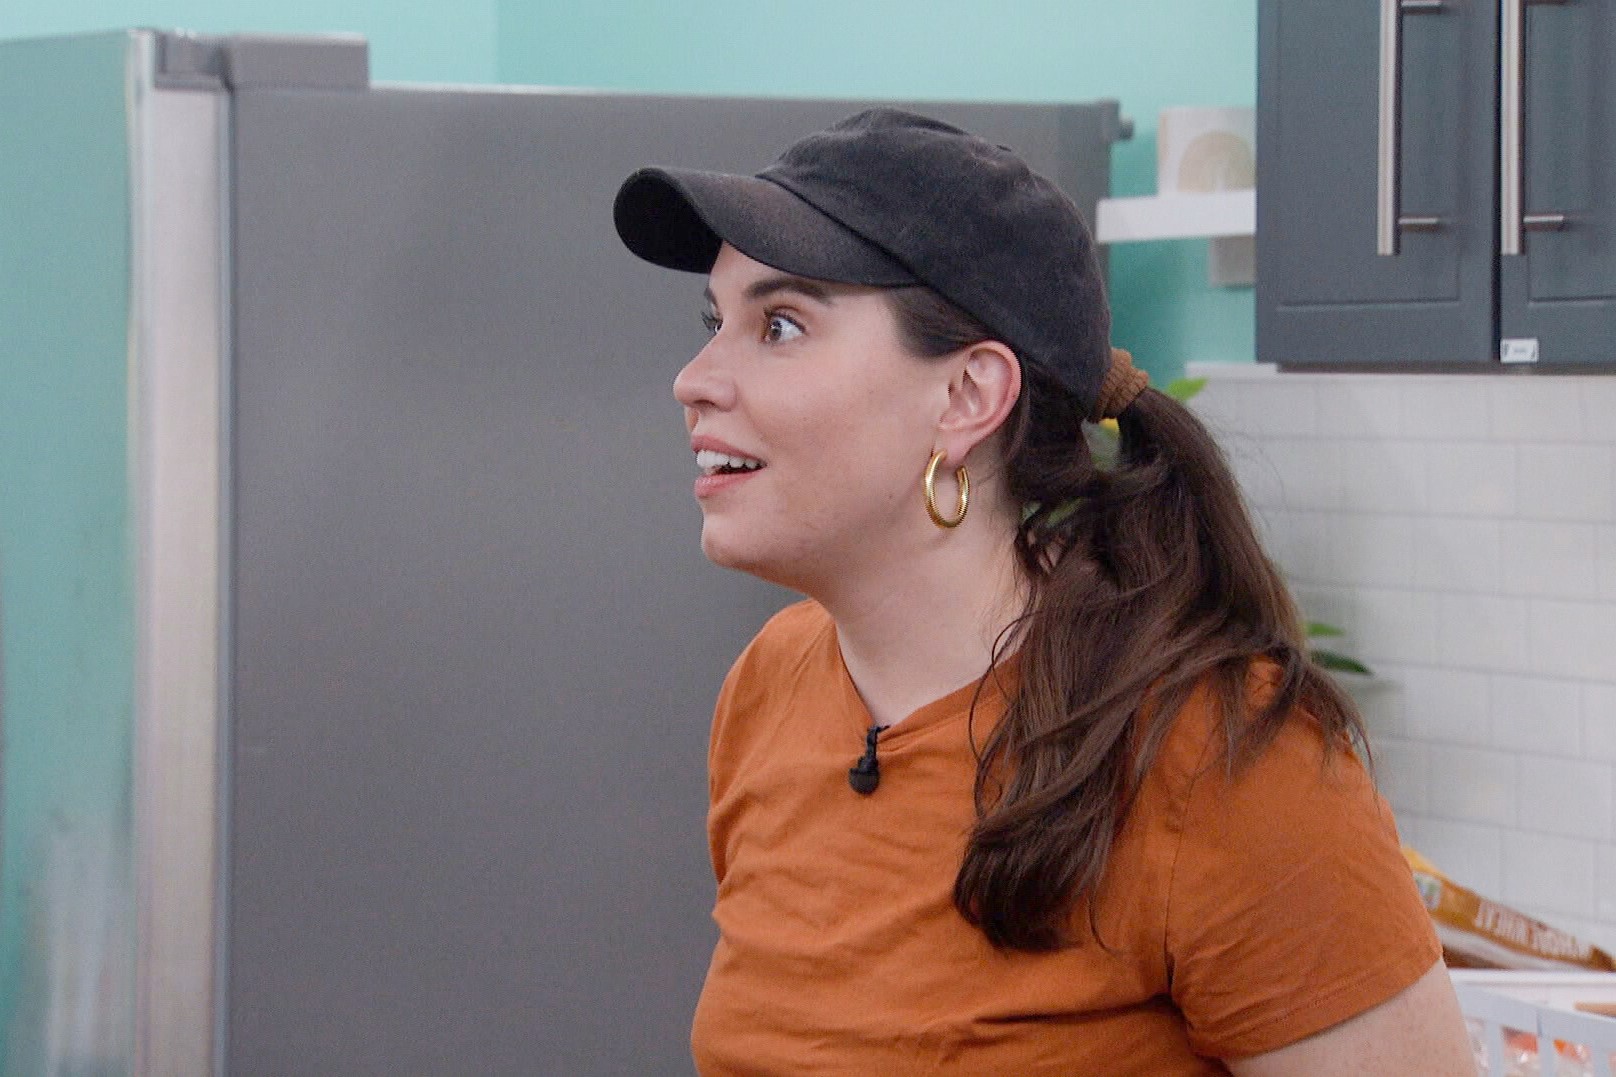 Brittany Hoopes, who stars in 'Big Brother 24' on CBS, wears an orange shirt and black baseball cap.